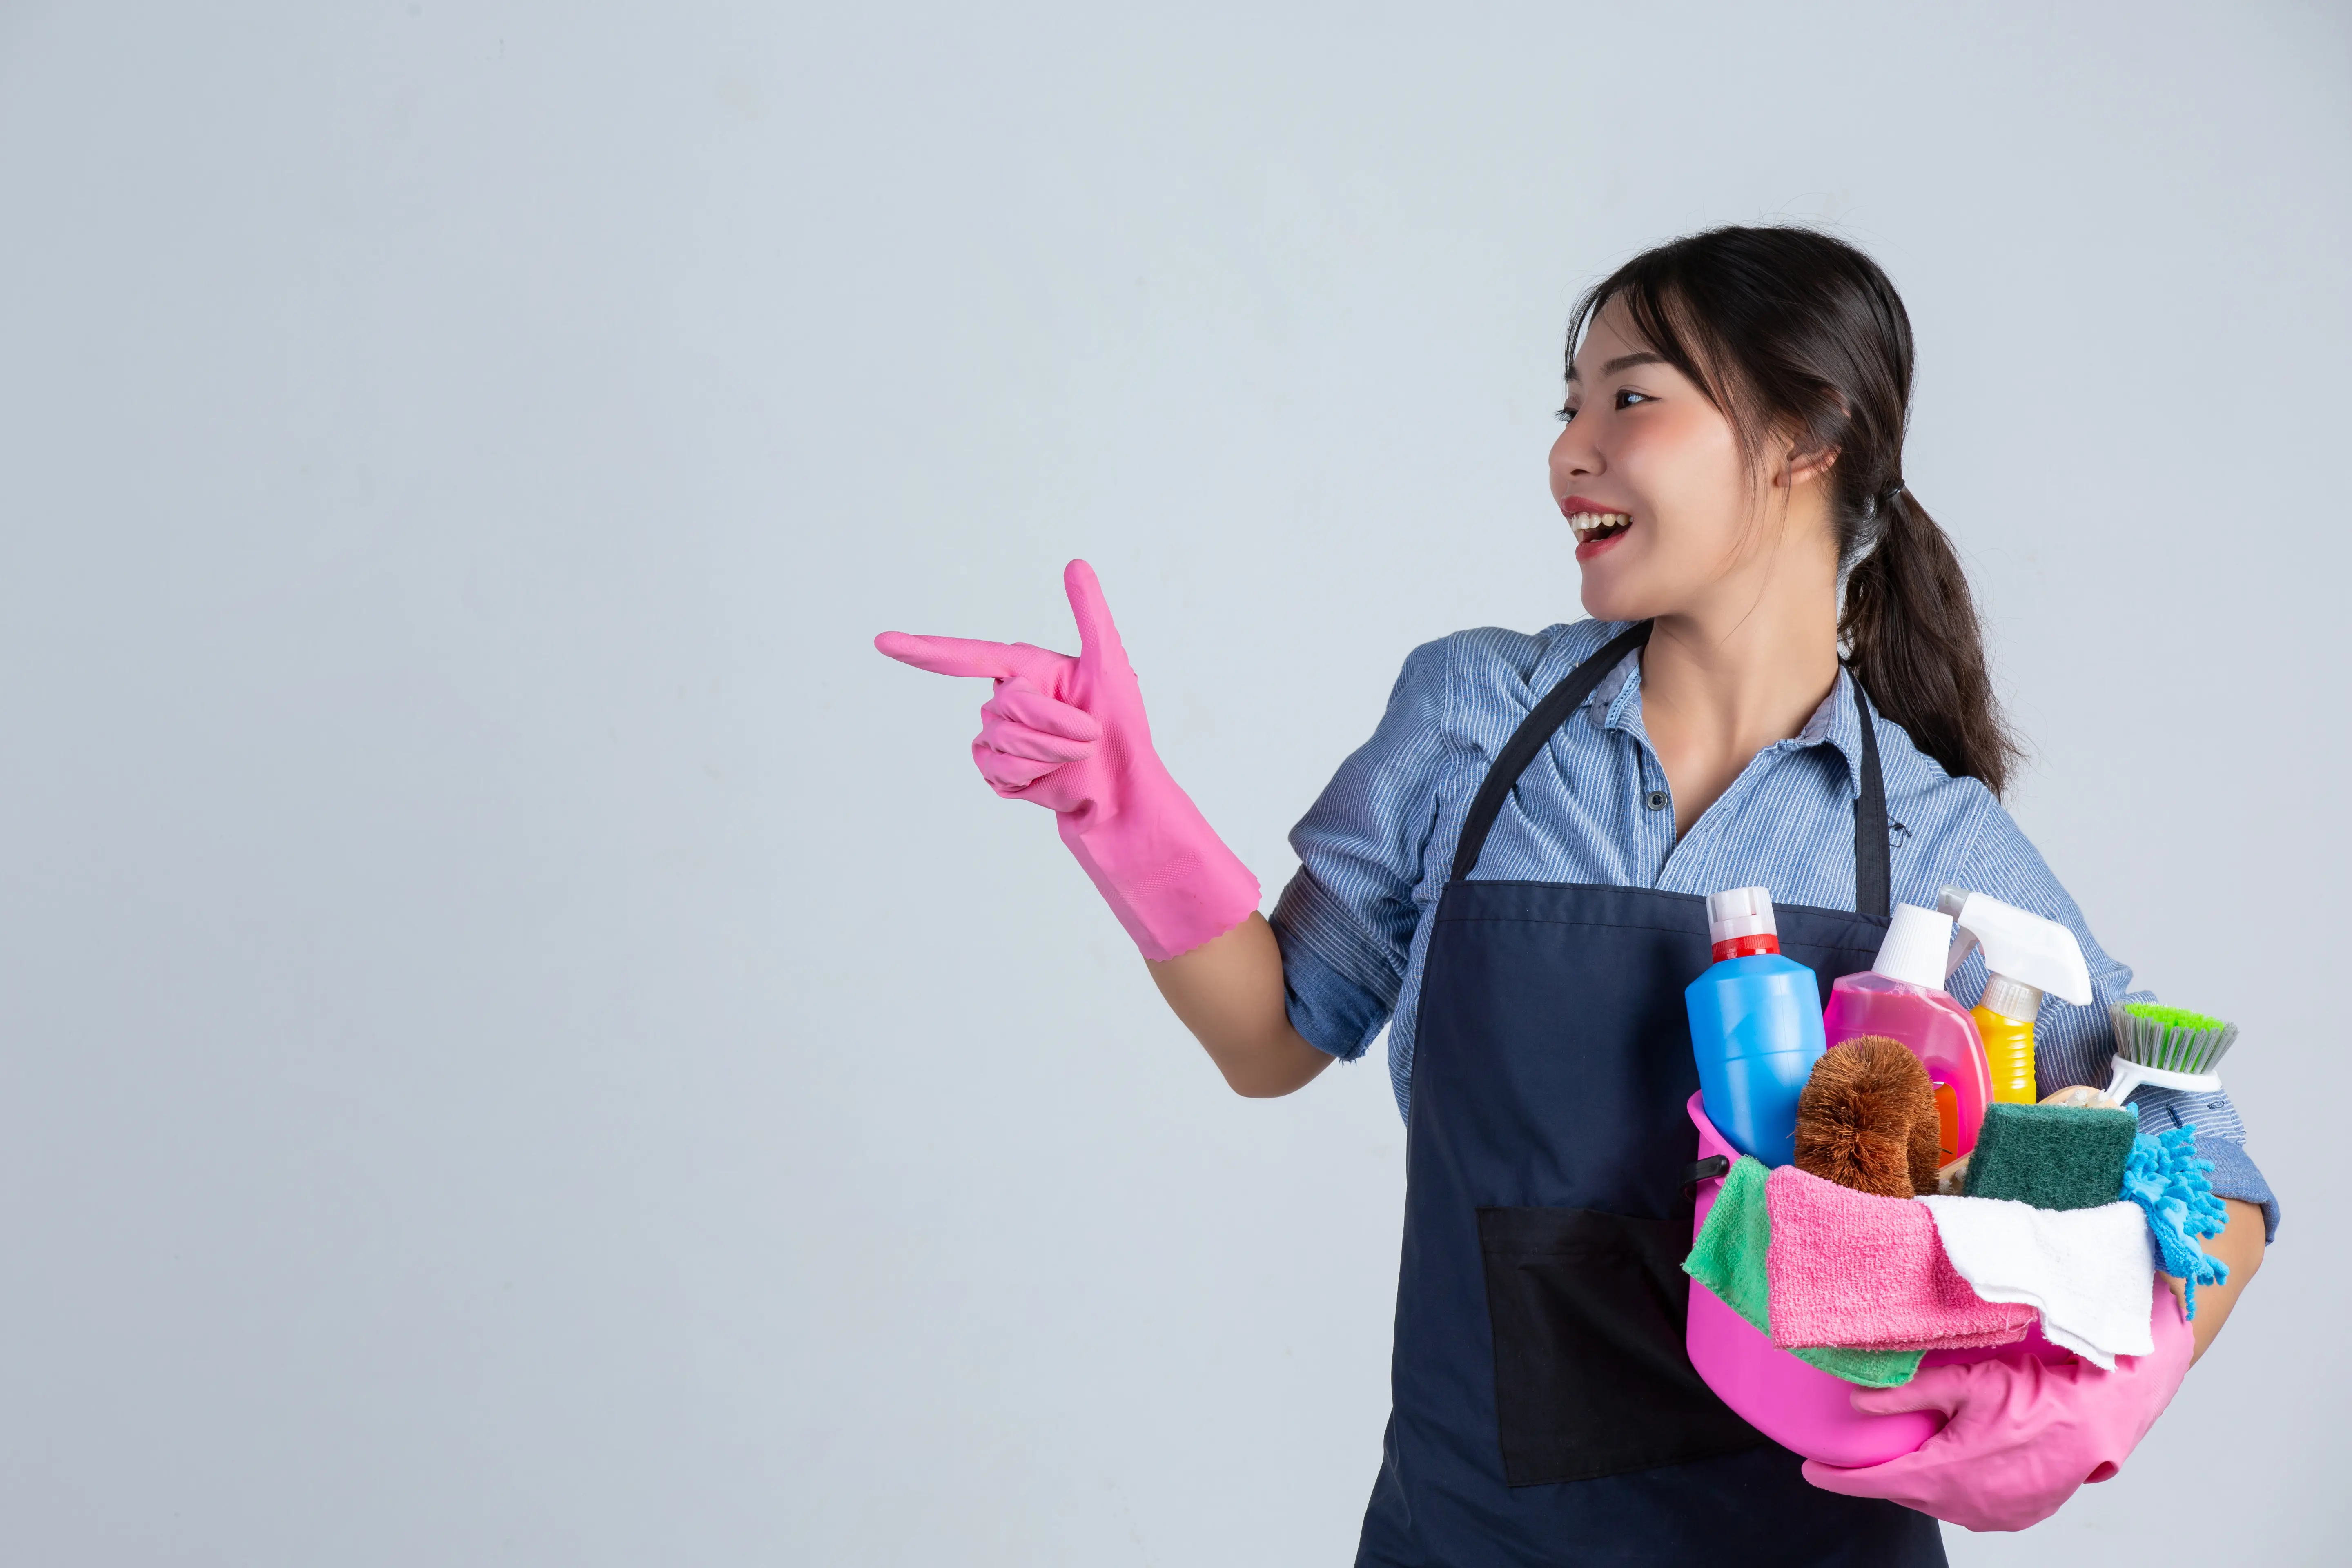 residential cleaning services vancouver, house cleaning services vancouver